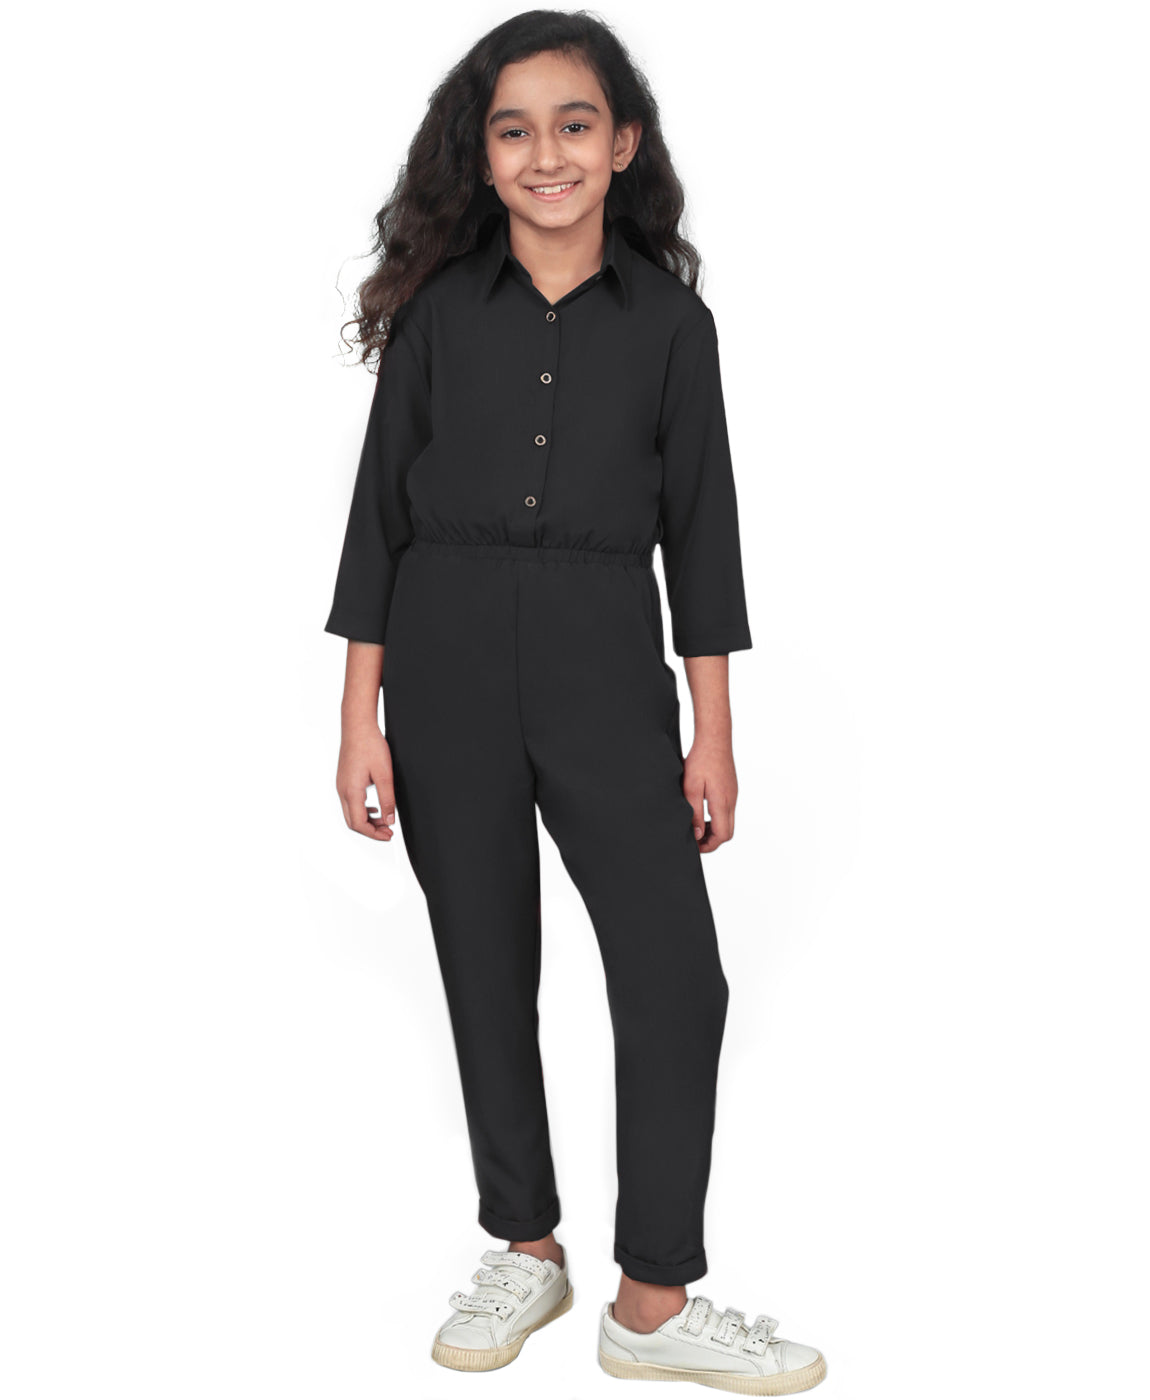 Girls Clothing | Jumpsuit For 11-12 Years Girl | Freeup